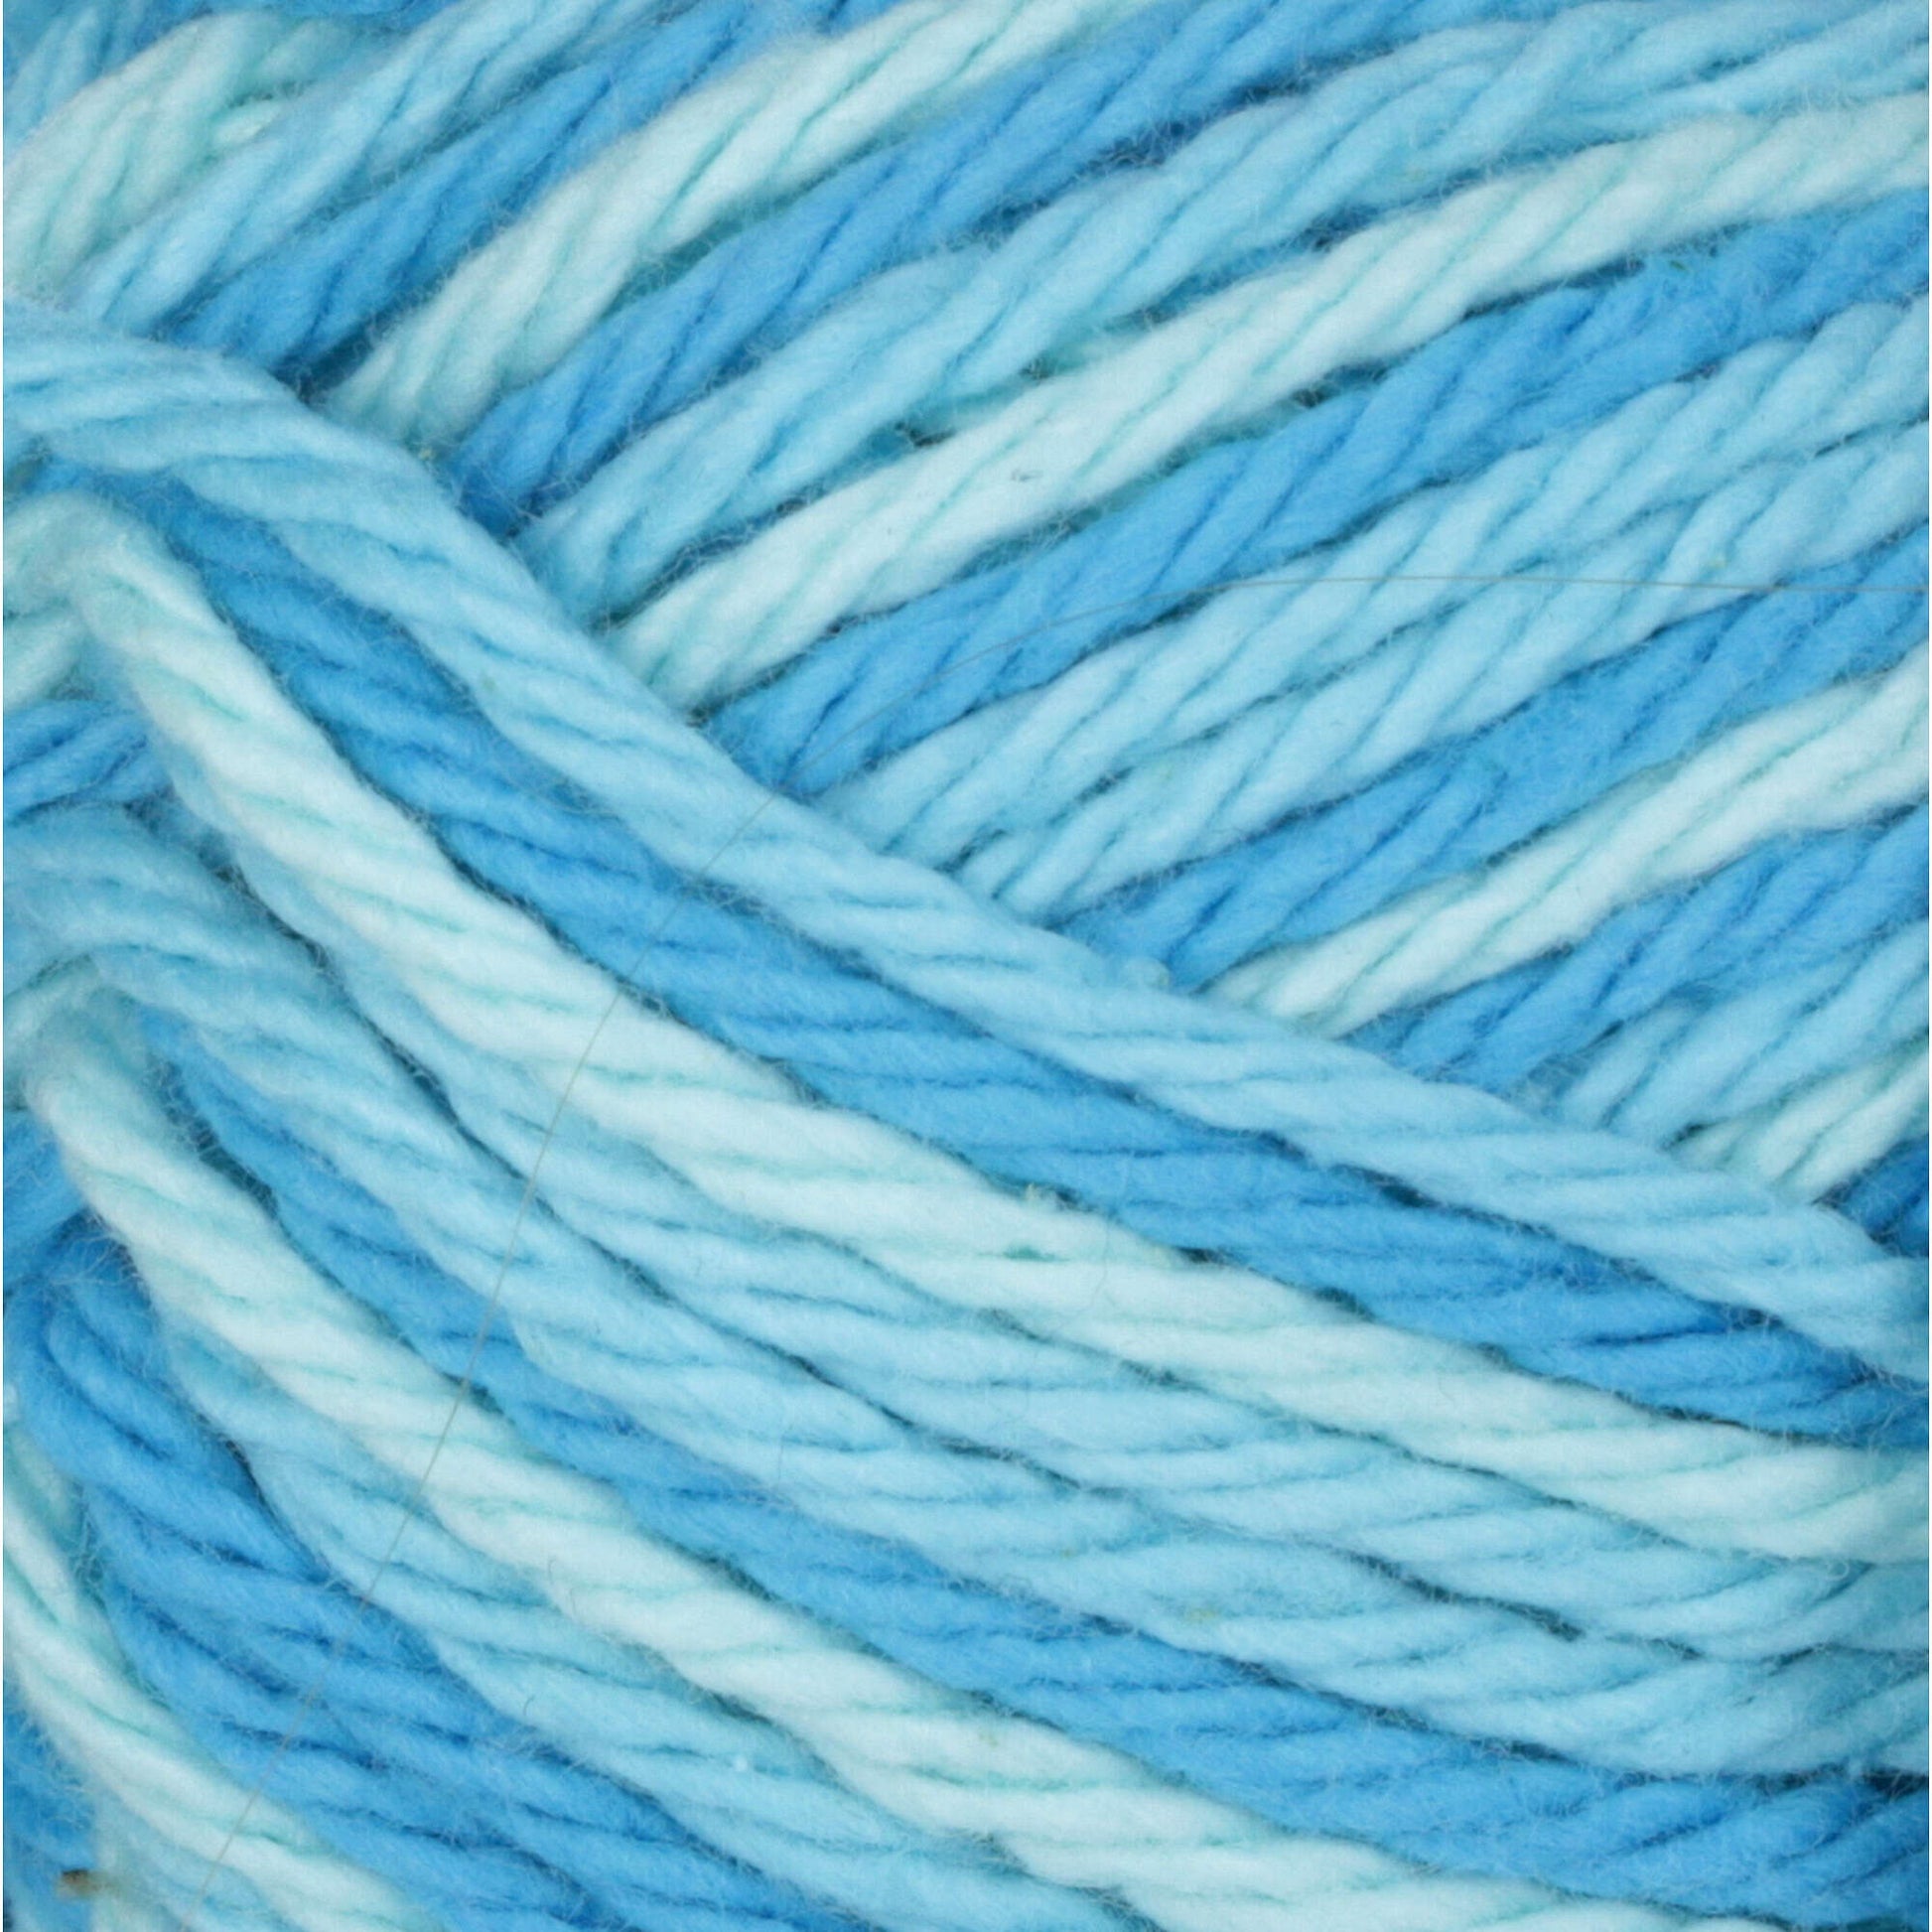 Bernat Handicrafter Cotton Ombres Yarn Swimming Pool Ombre